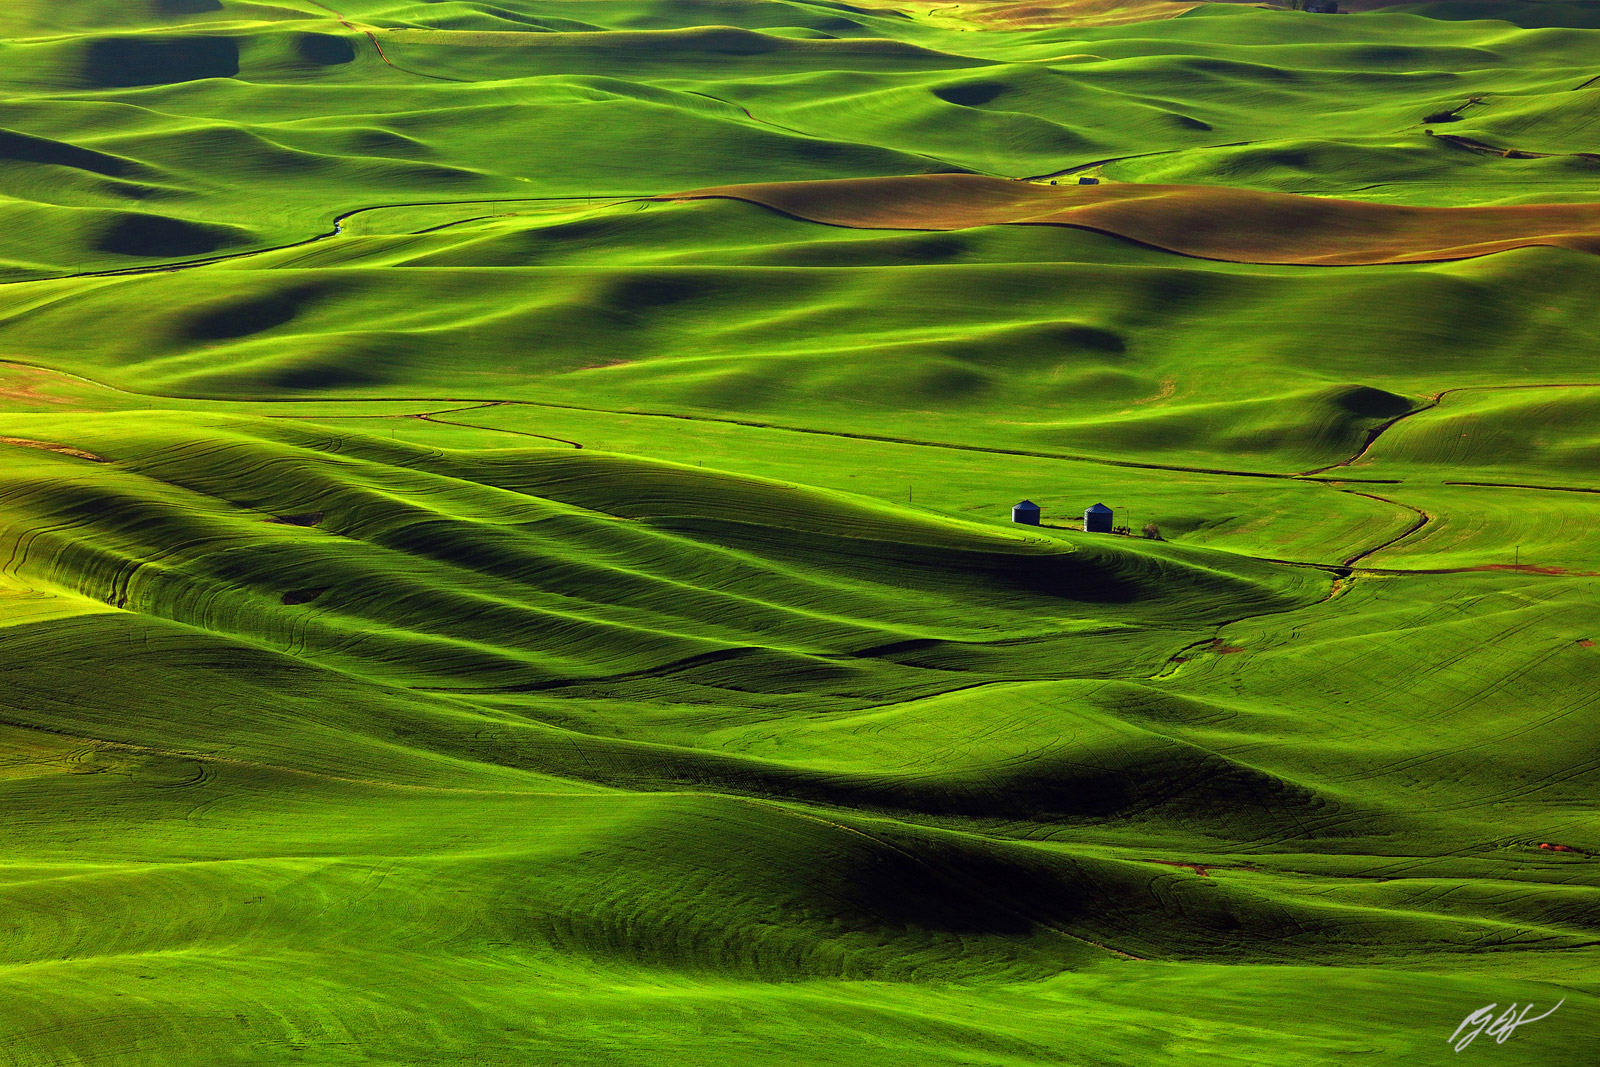 Evening Light on the Palouse Hills from Steptoe Butte in Steptoe Butte State Park in Washington